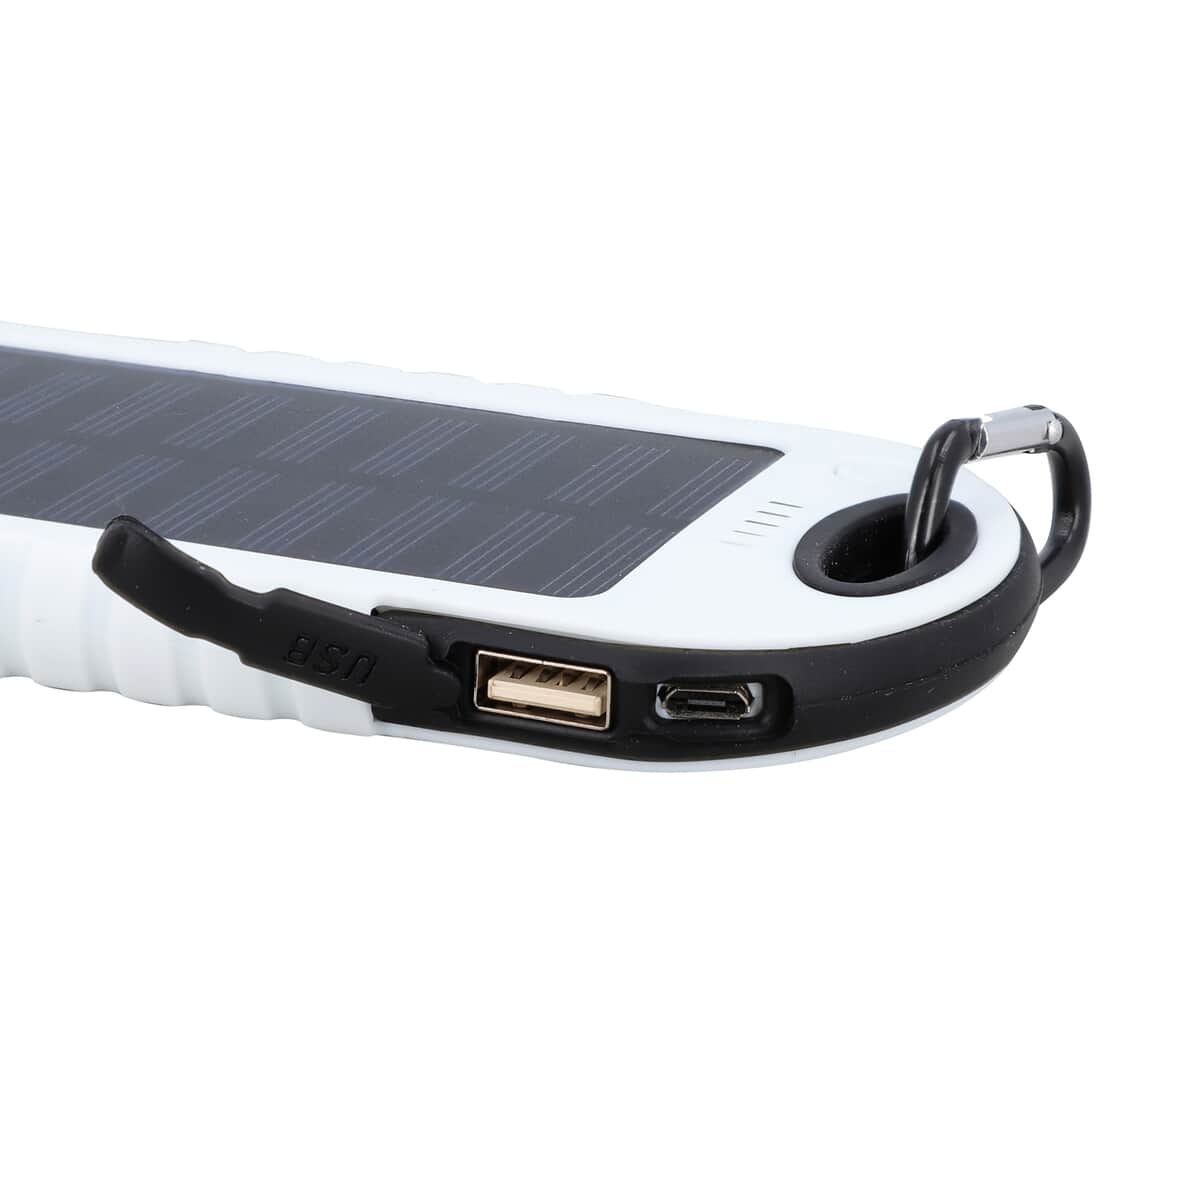 HOMESMART White Carabiner Solar 5000 mAh Battery Charger with USB & Emergency LED Torch image number 4